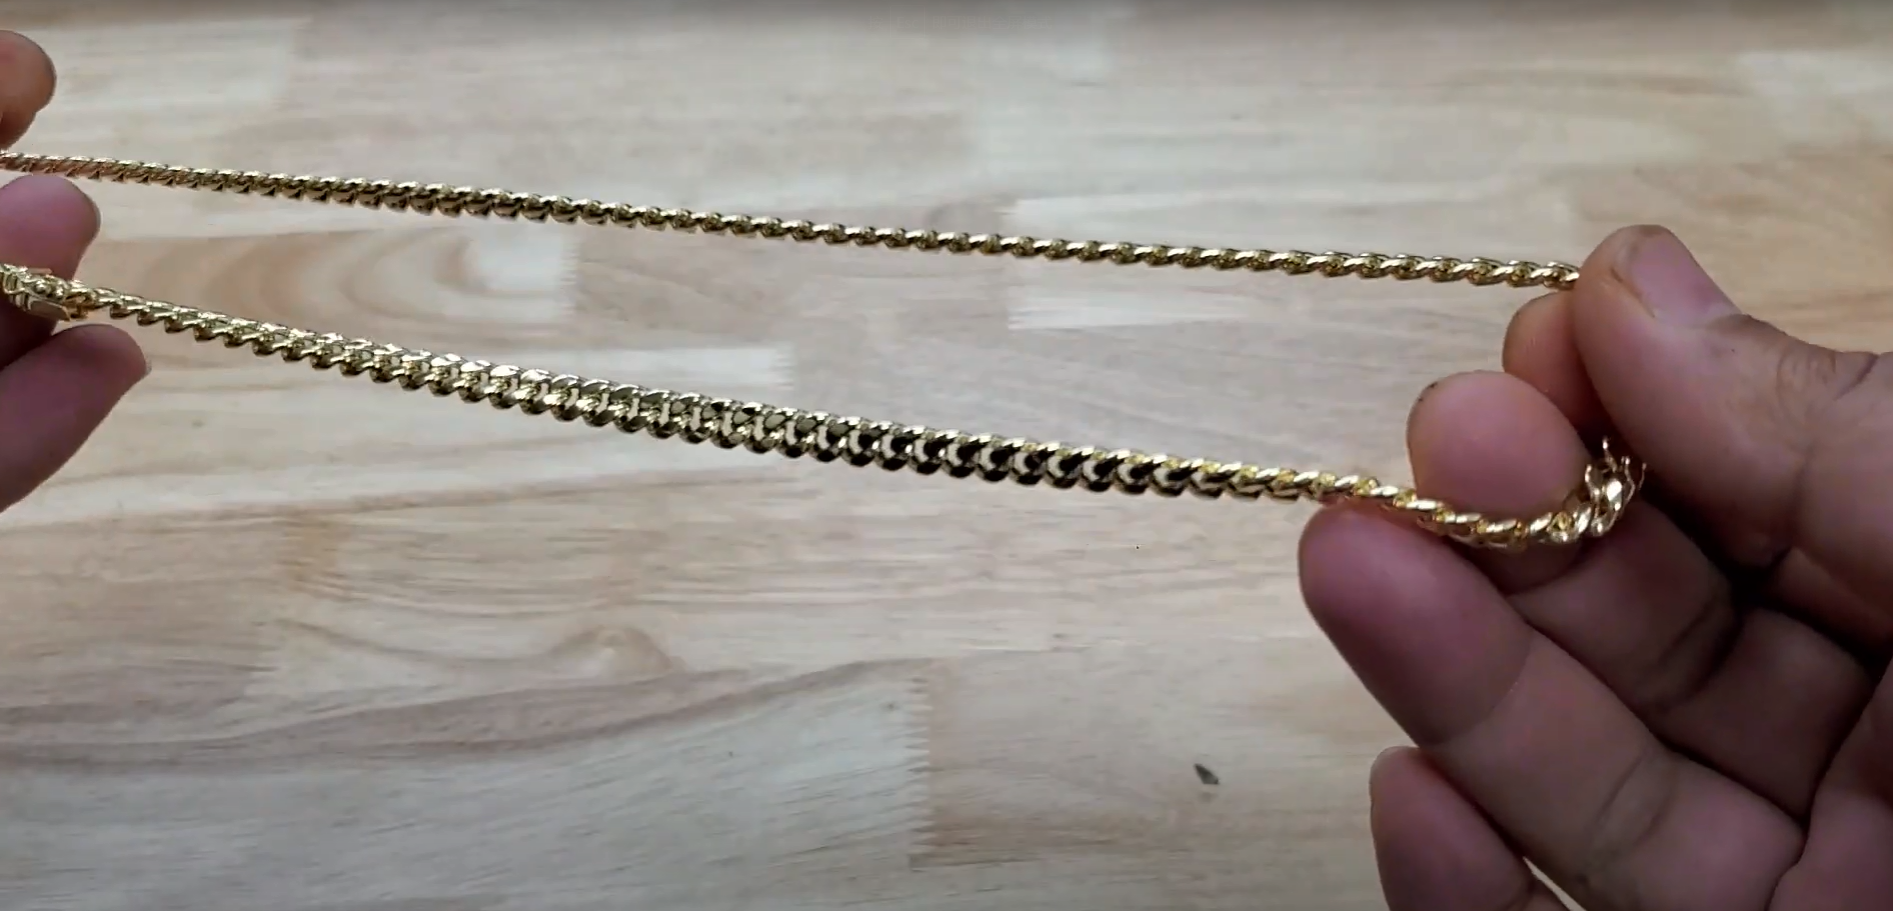 How to Shorten a Chain Necklace Without Cutting? – GirlsGlitter